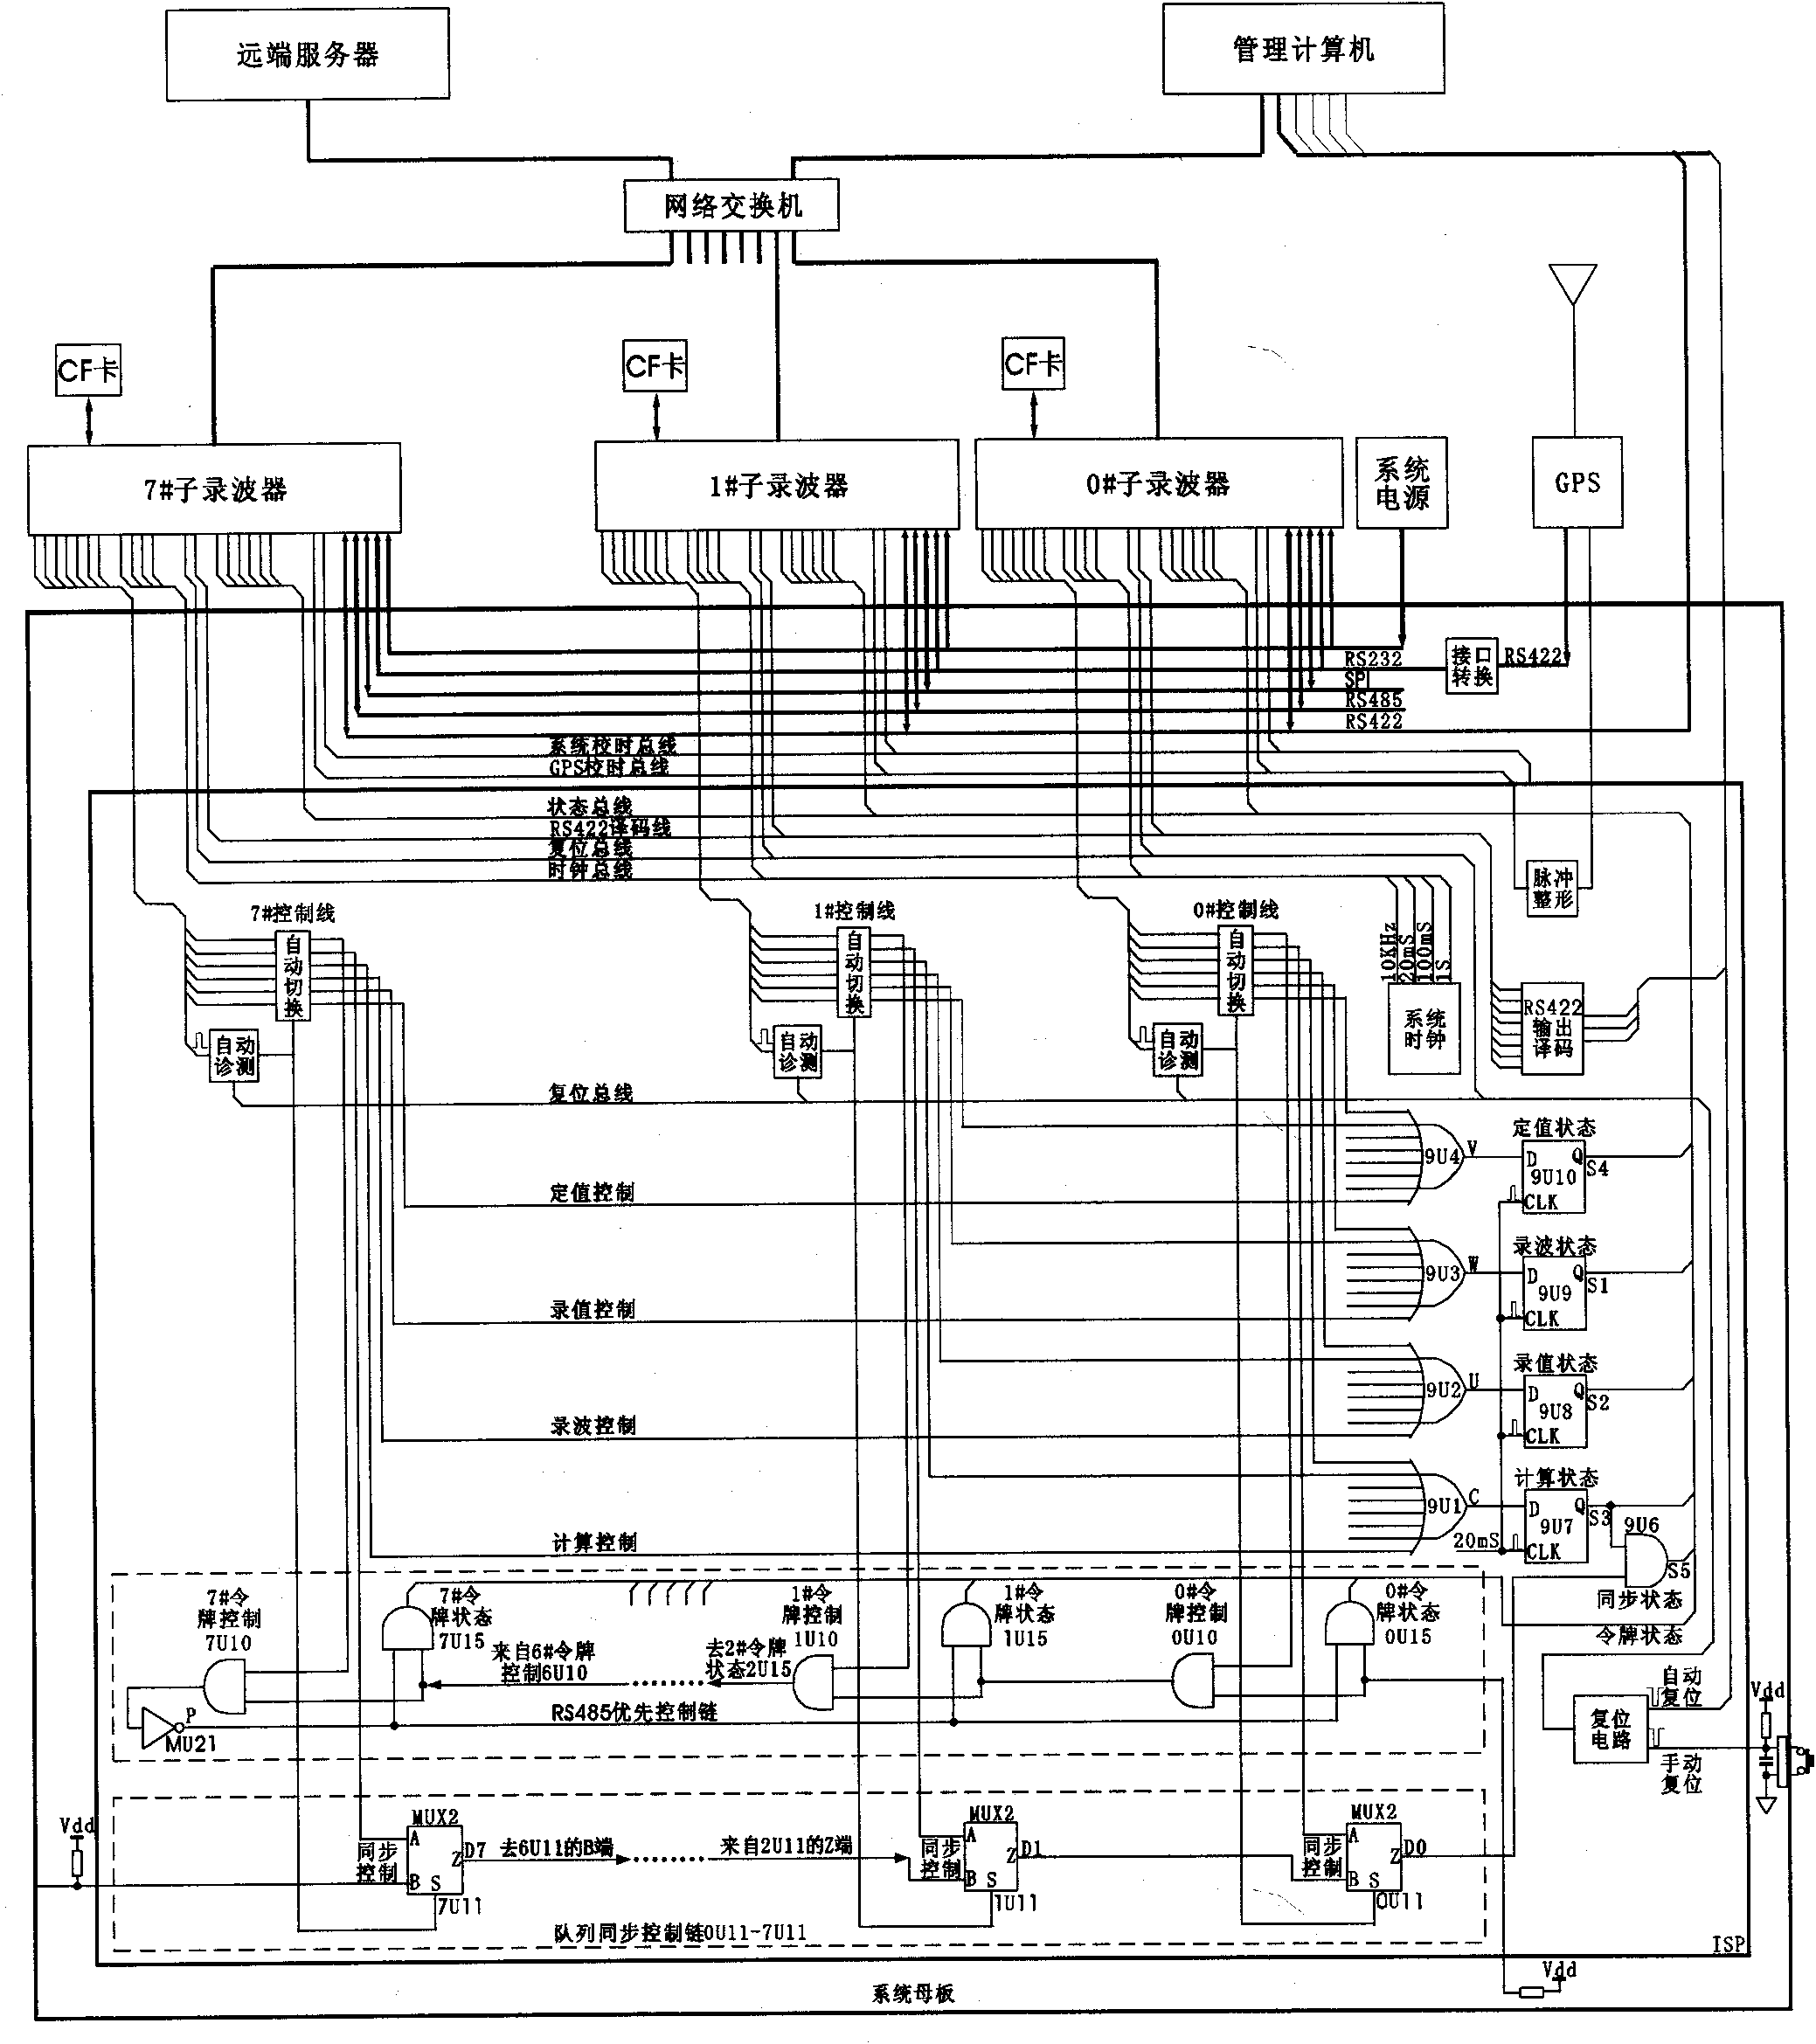 Synchronization method based on distributed-type integrated recorder parallel buses